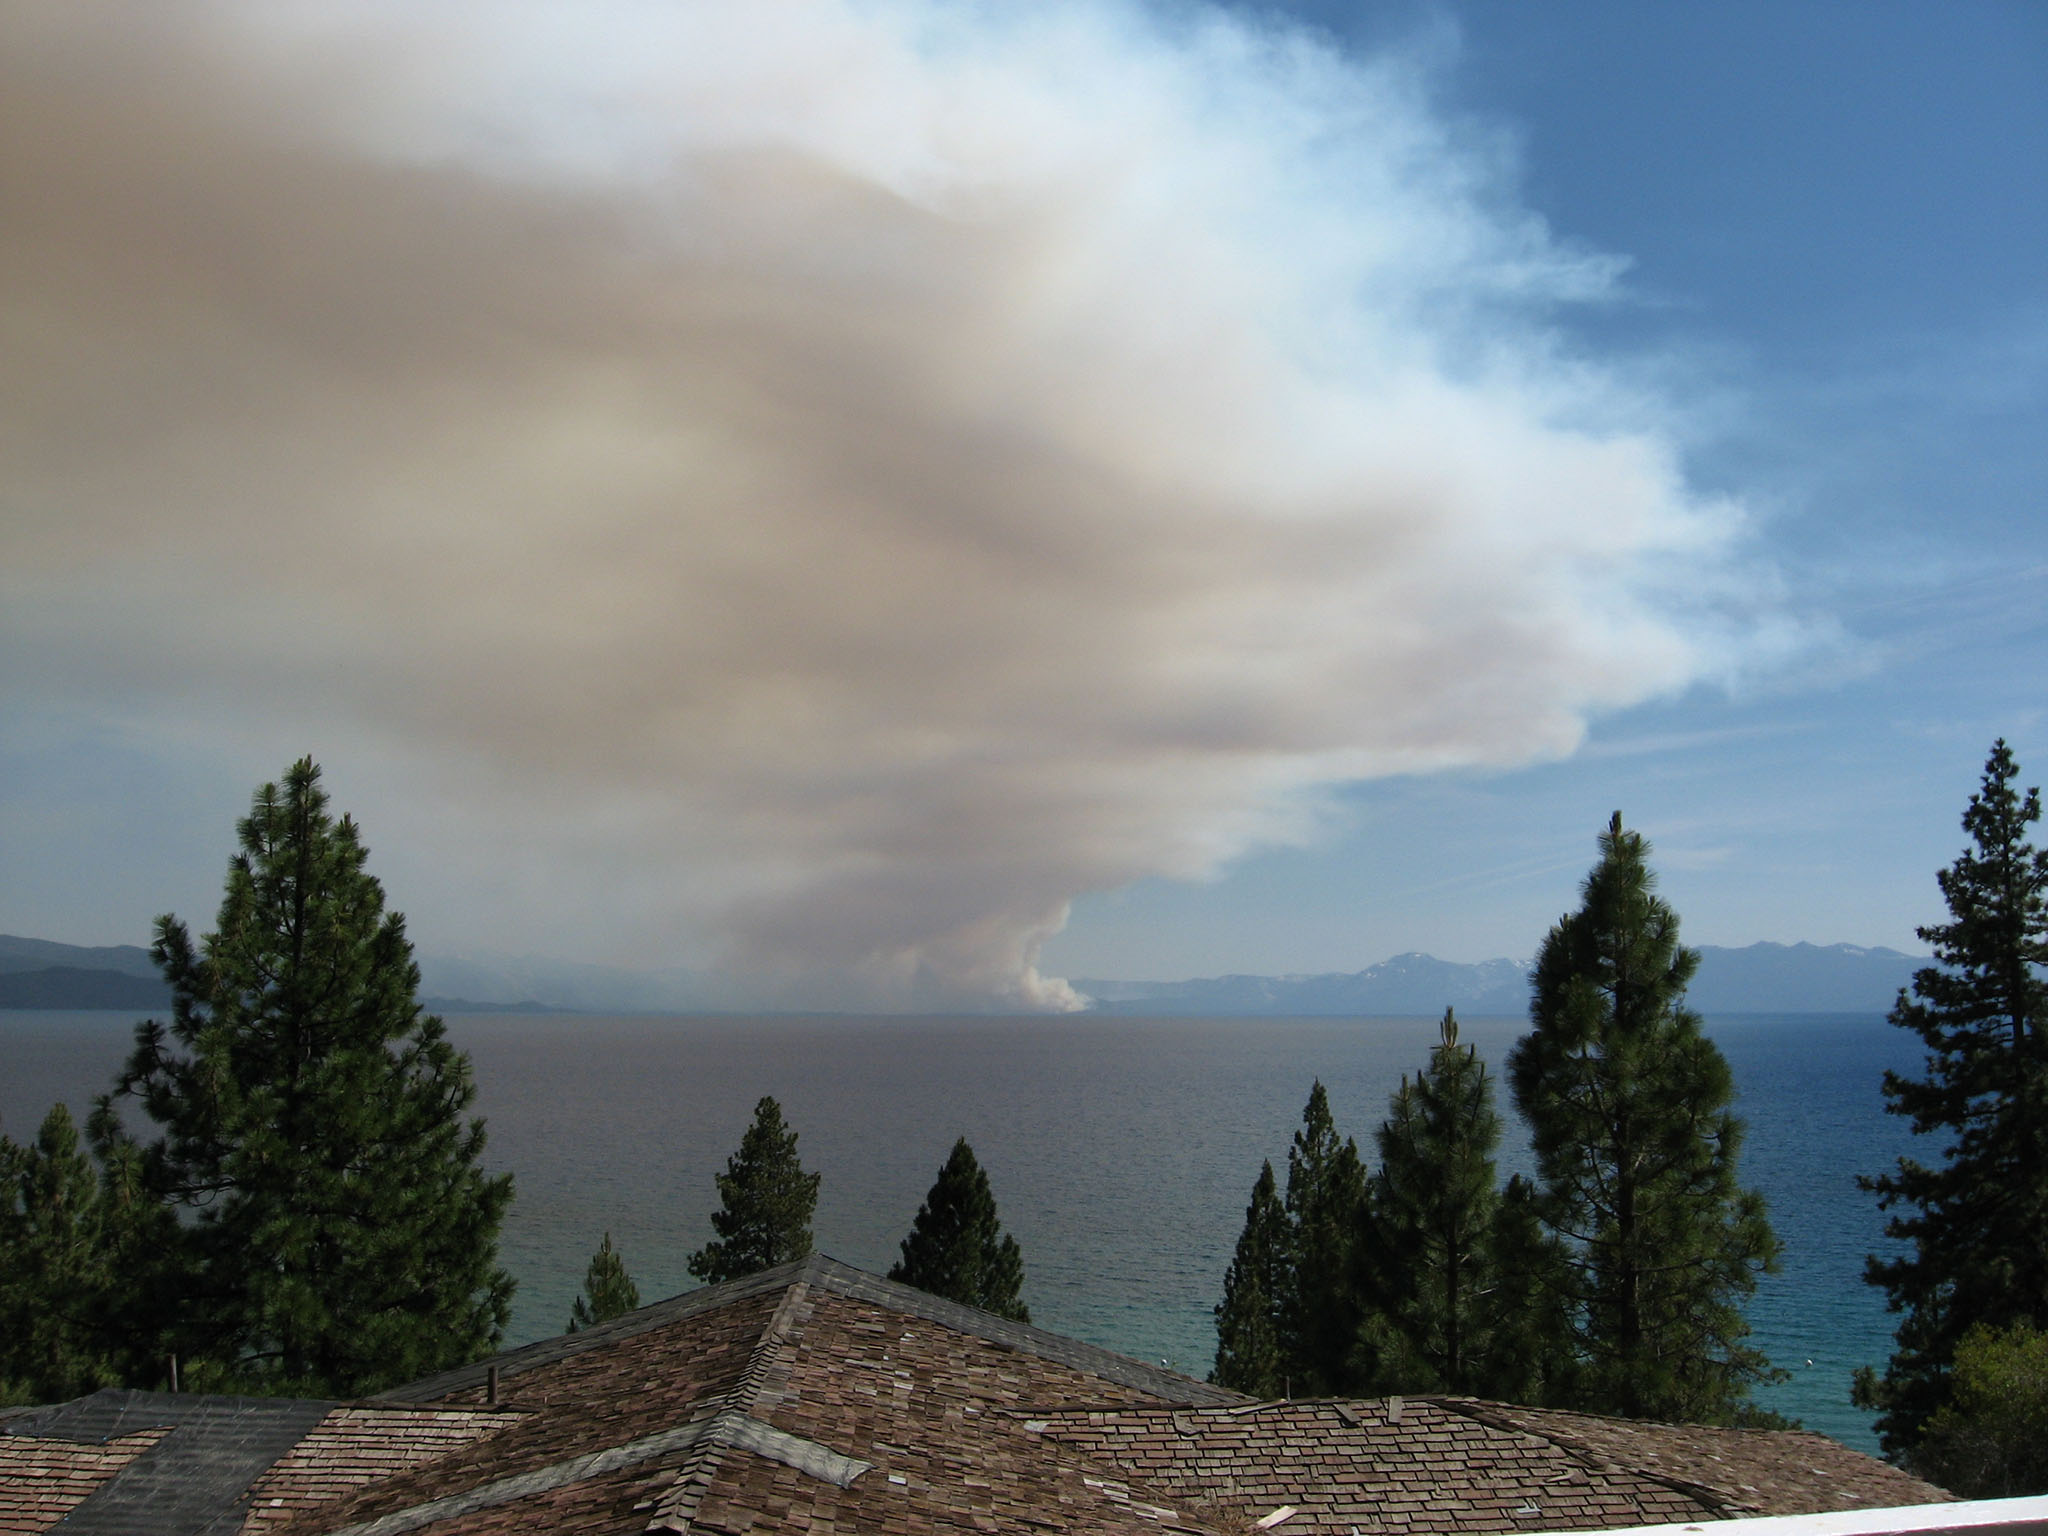 Looking across Lake Tahoe to the smoke plume from the Angora fire